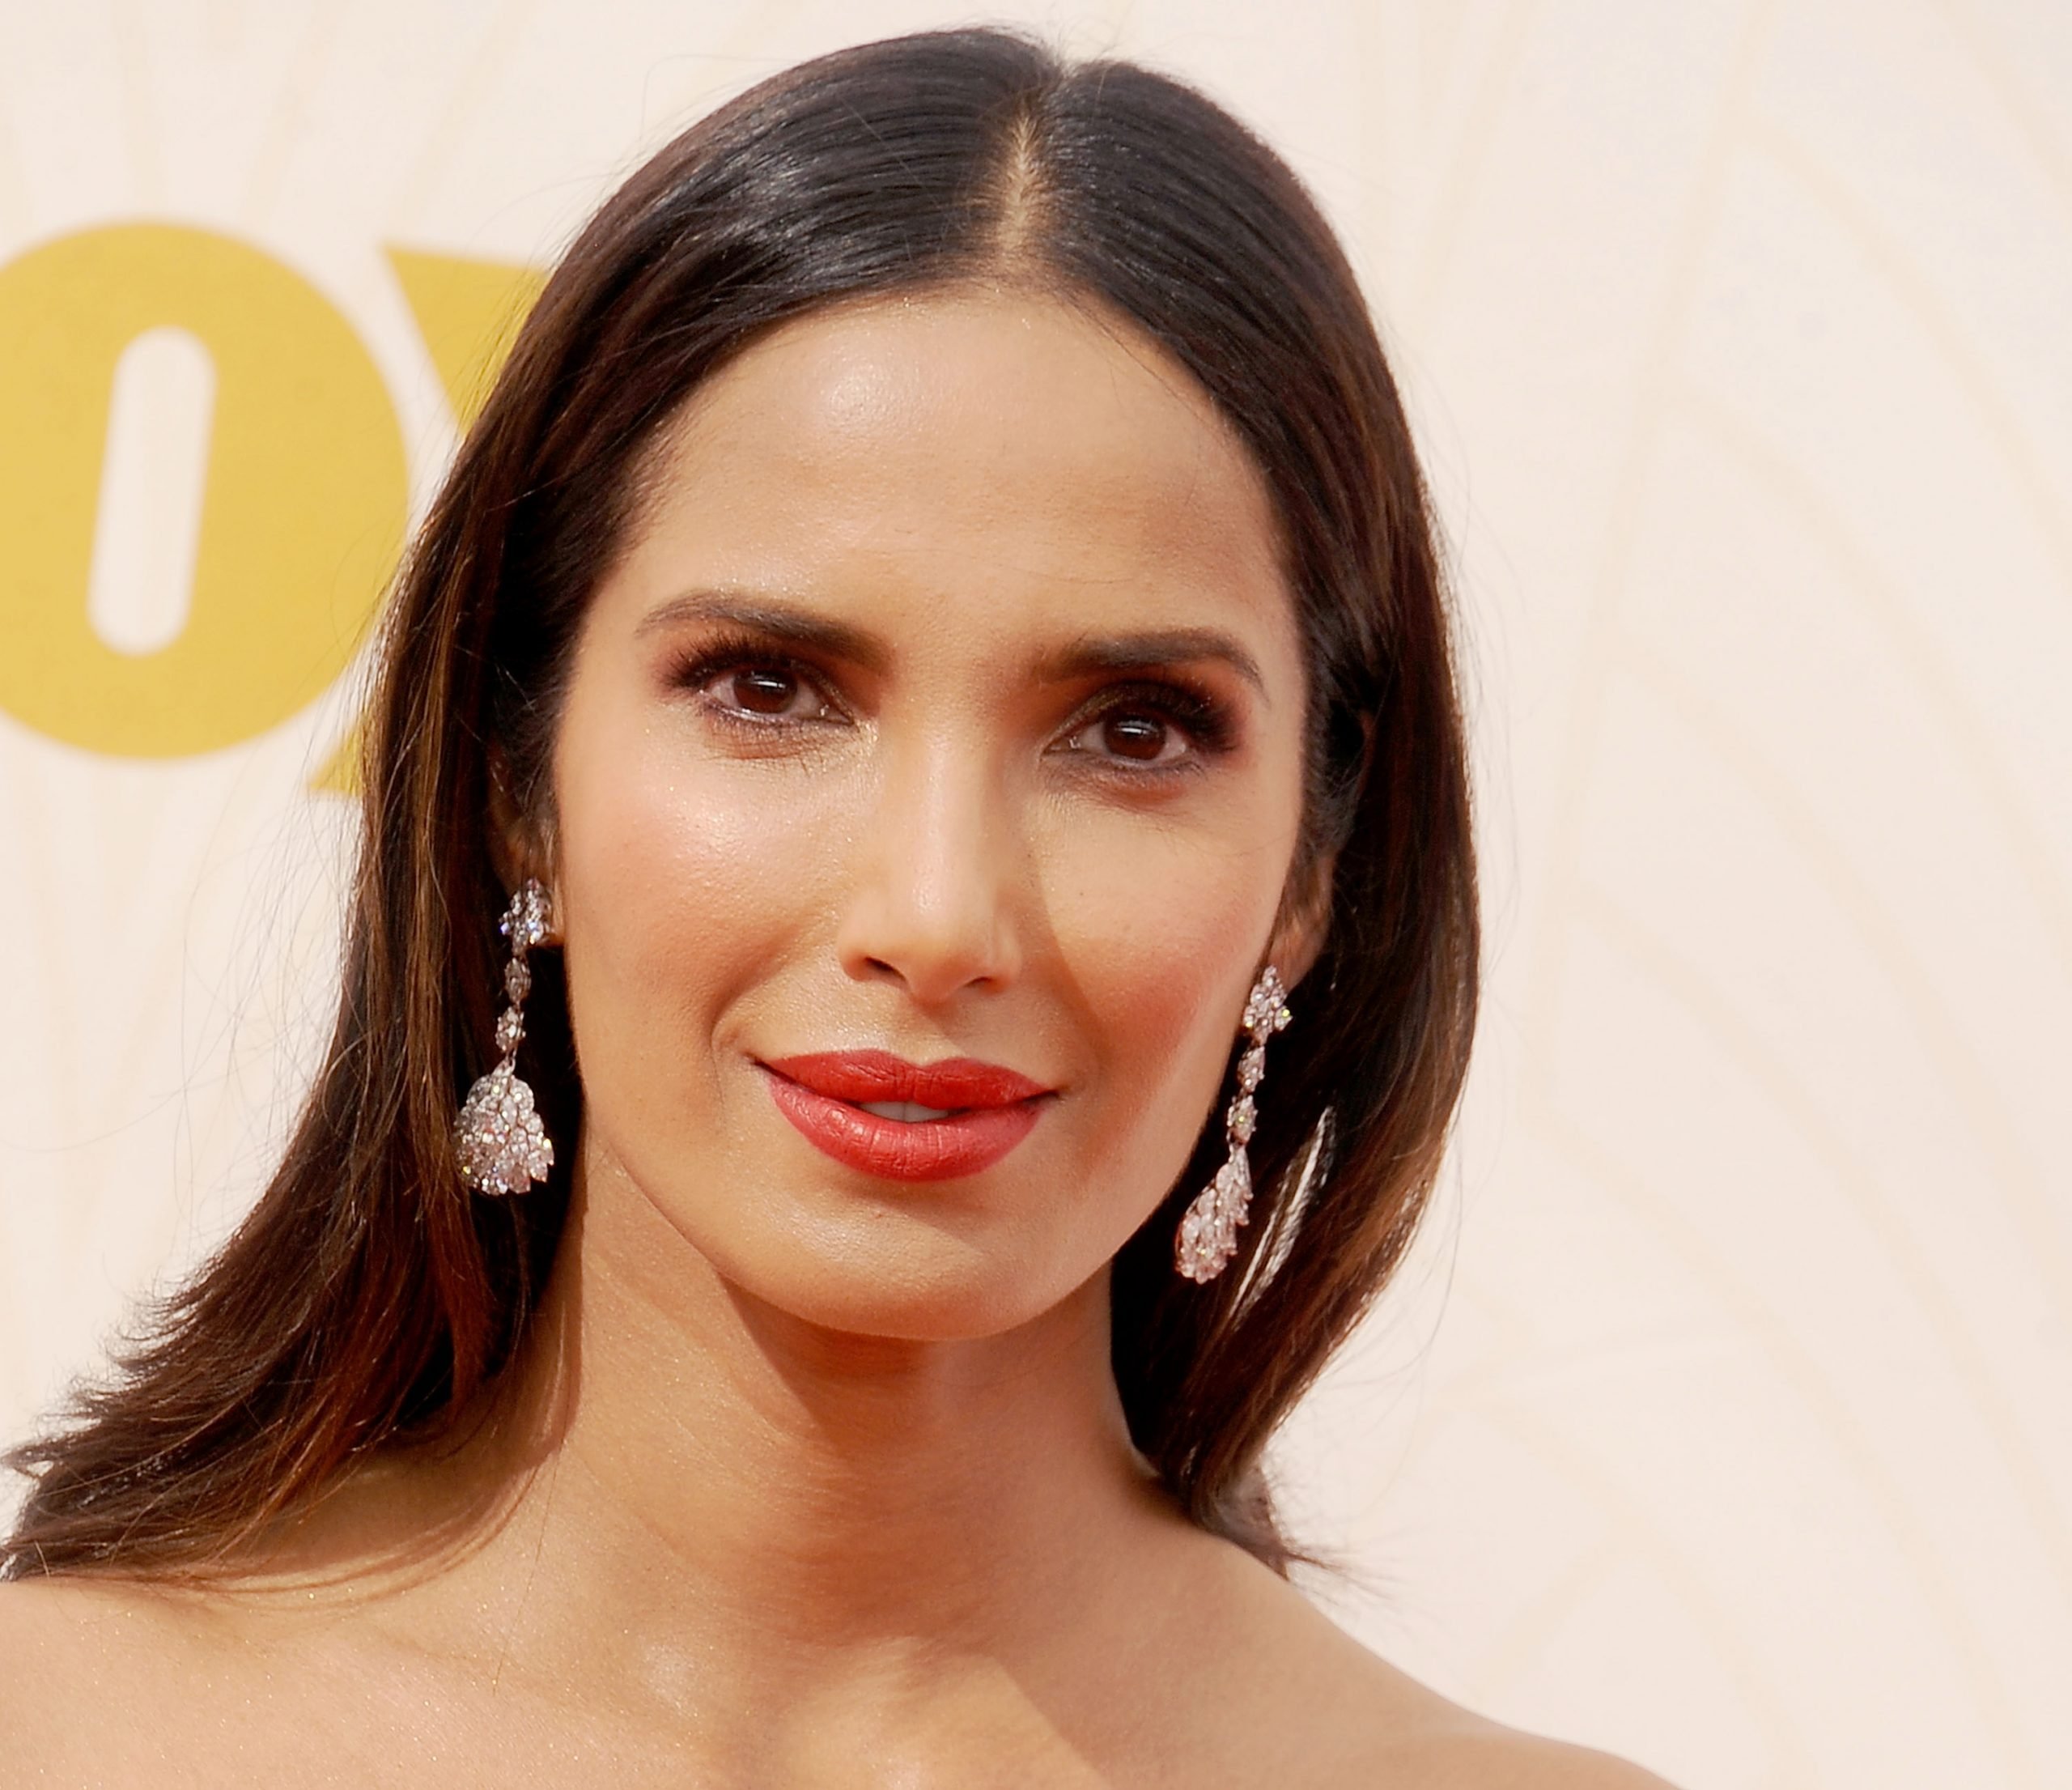 'Top Chef' host and now children's book author Padma Lakshmi